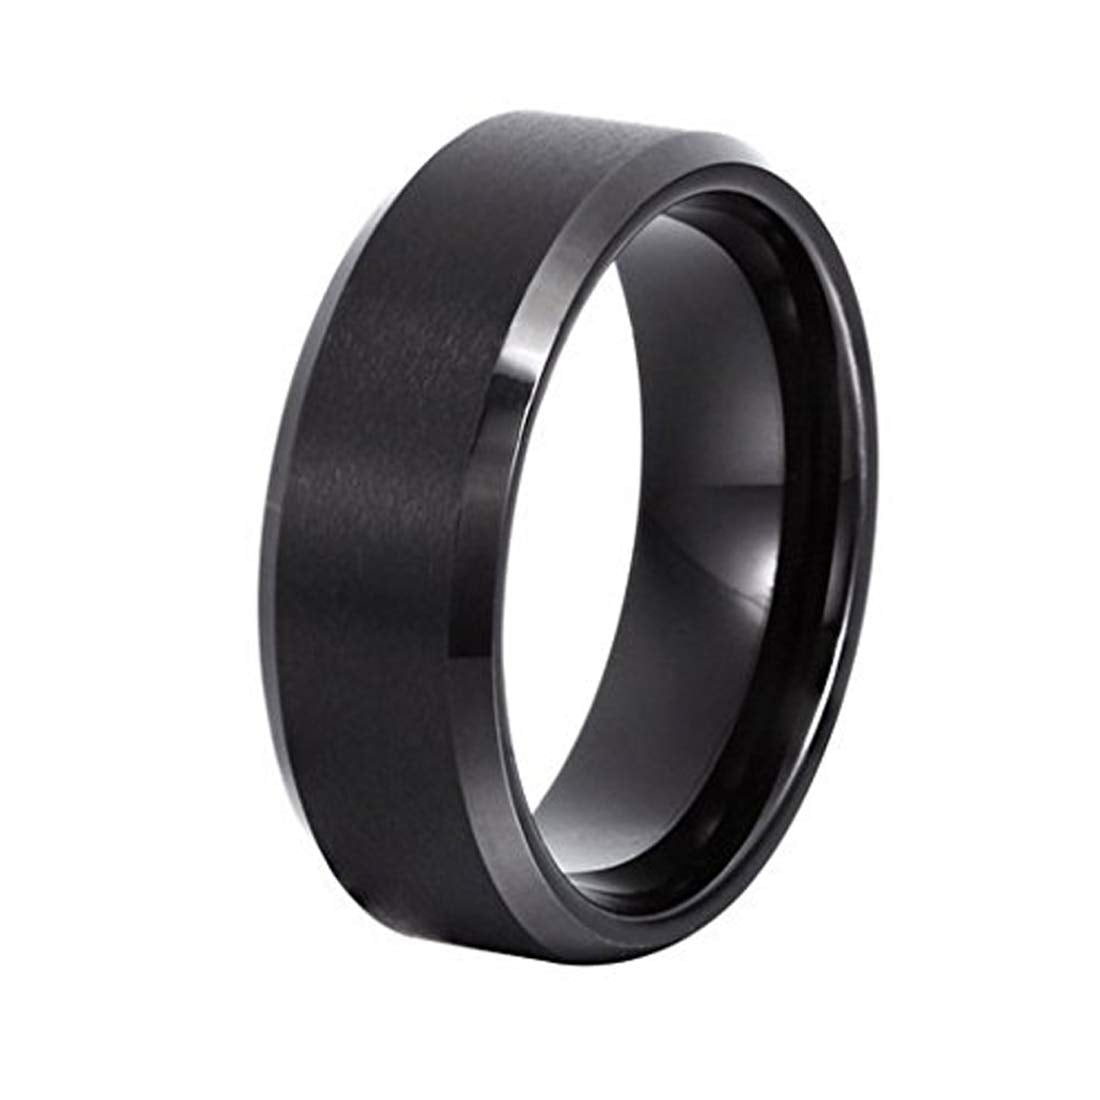 Yellow Chimes Rings for Women Black Ring 316L Stainless Steel Black Band Ring Women and Girls (10)